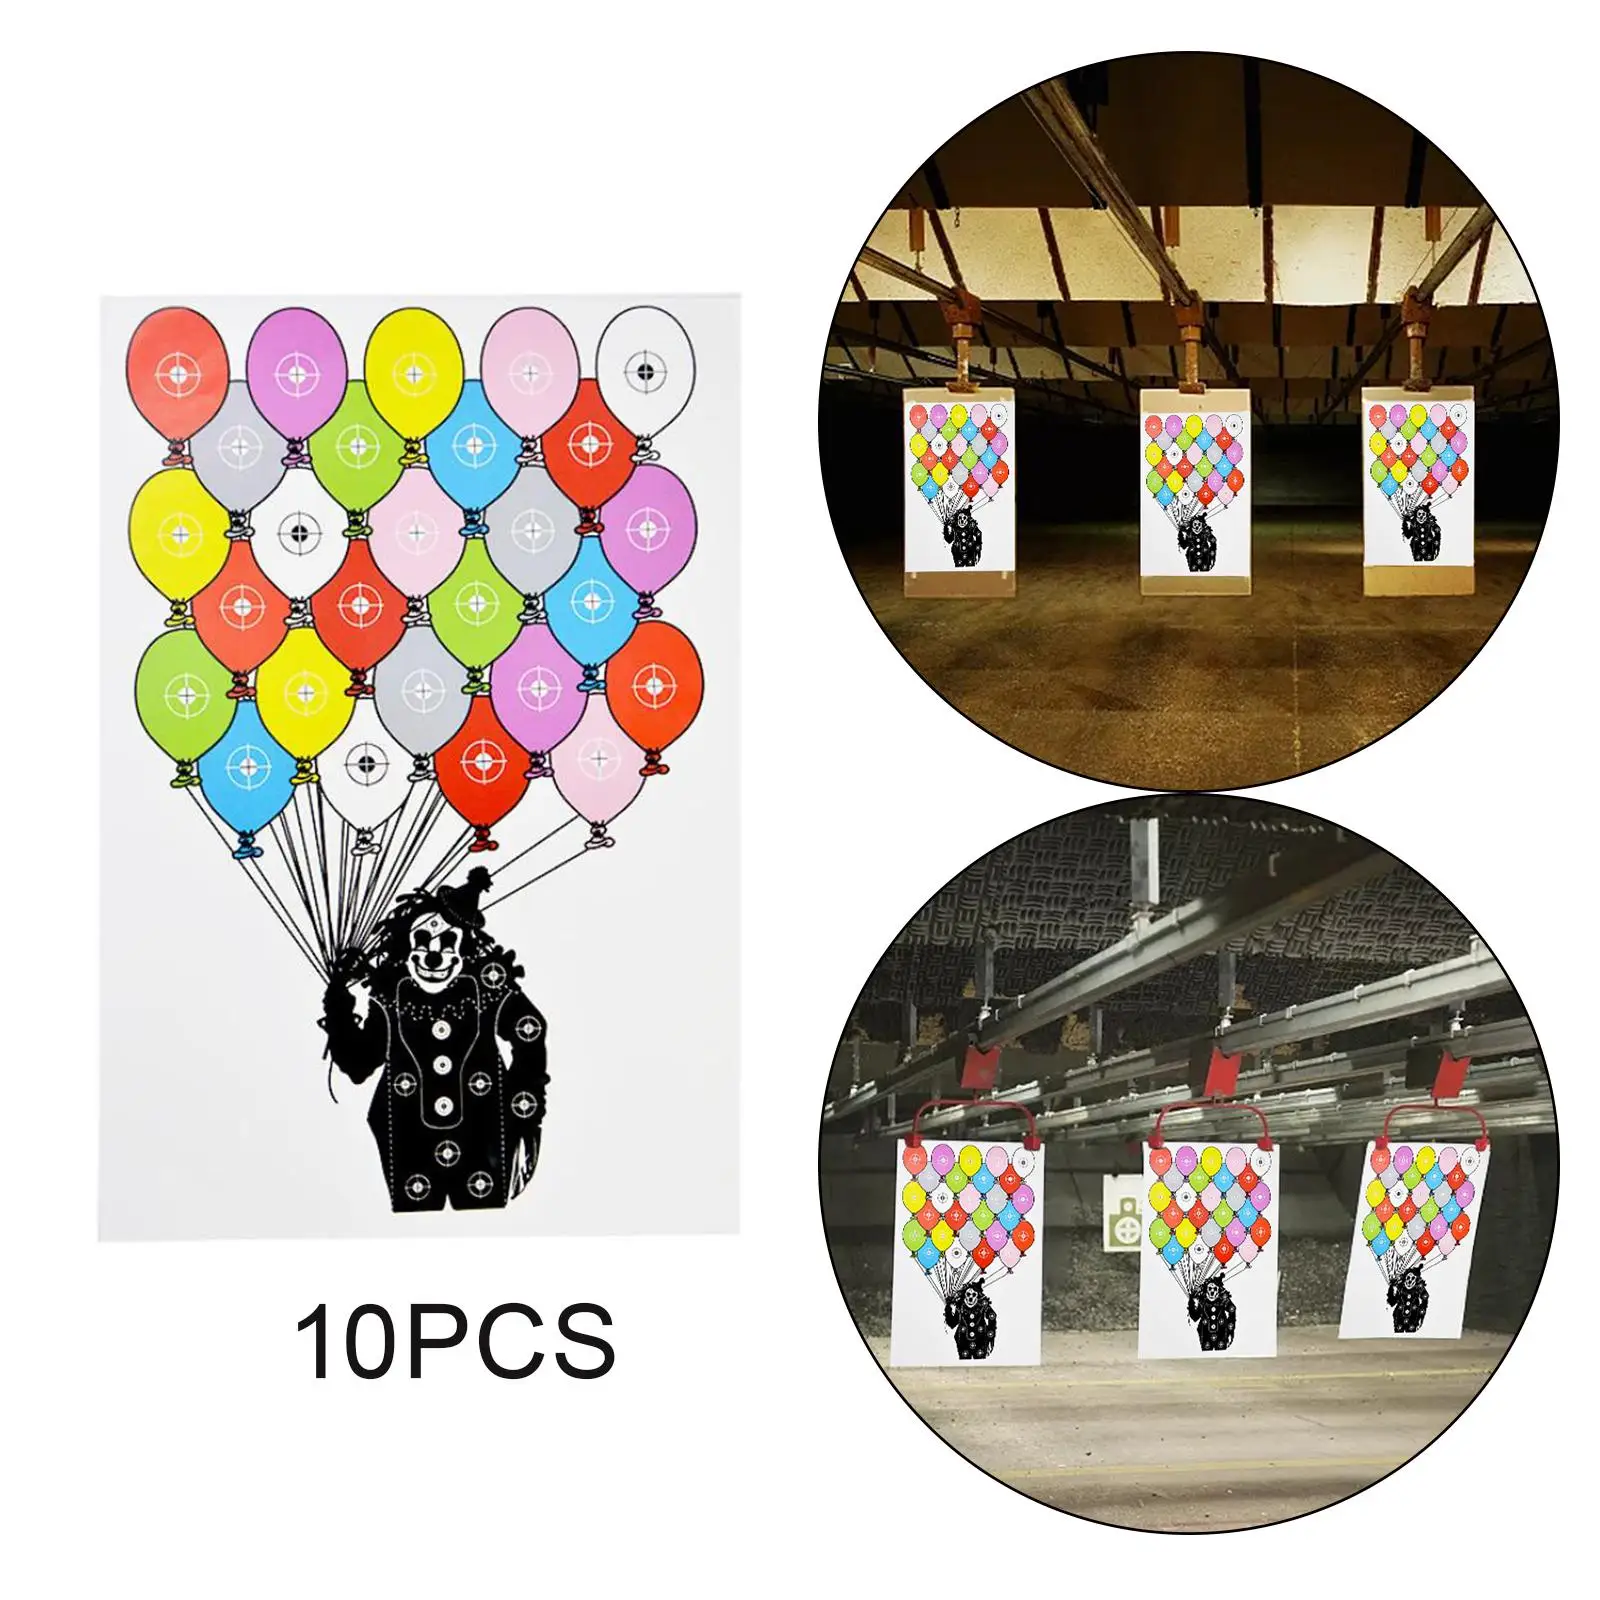 10Pcs Paper Silhouette Targets, for Indoor and Outdoor Shooting, Large 12